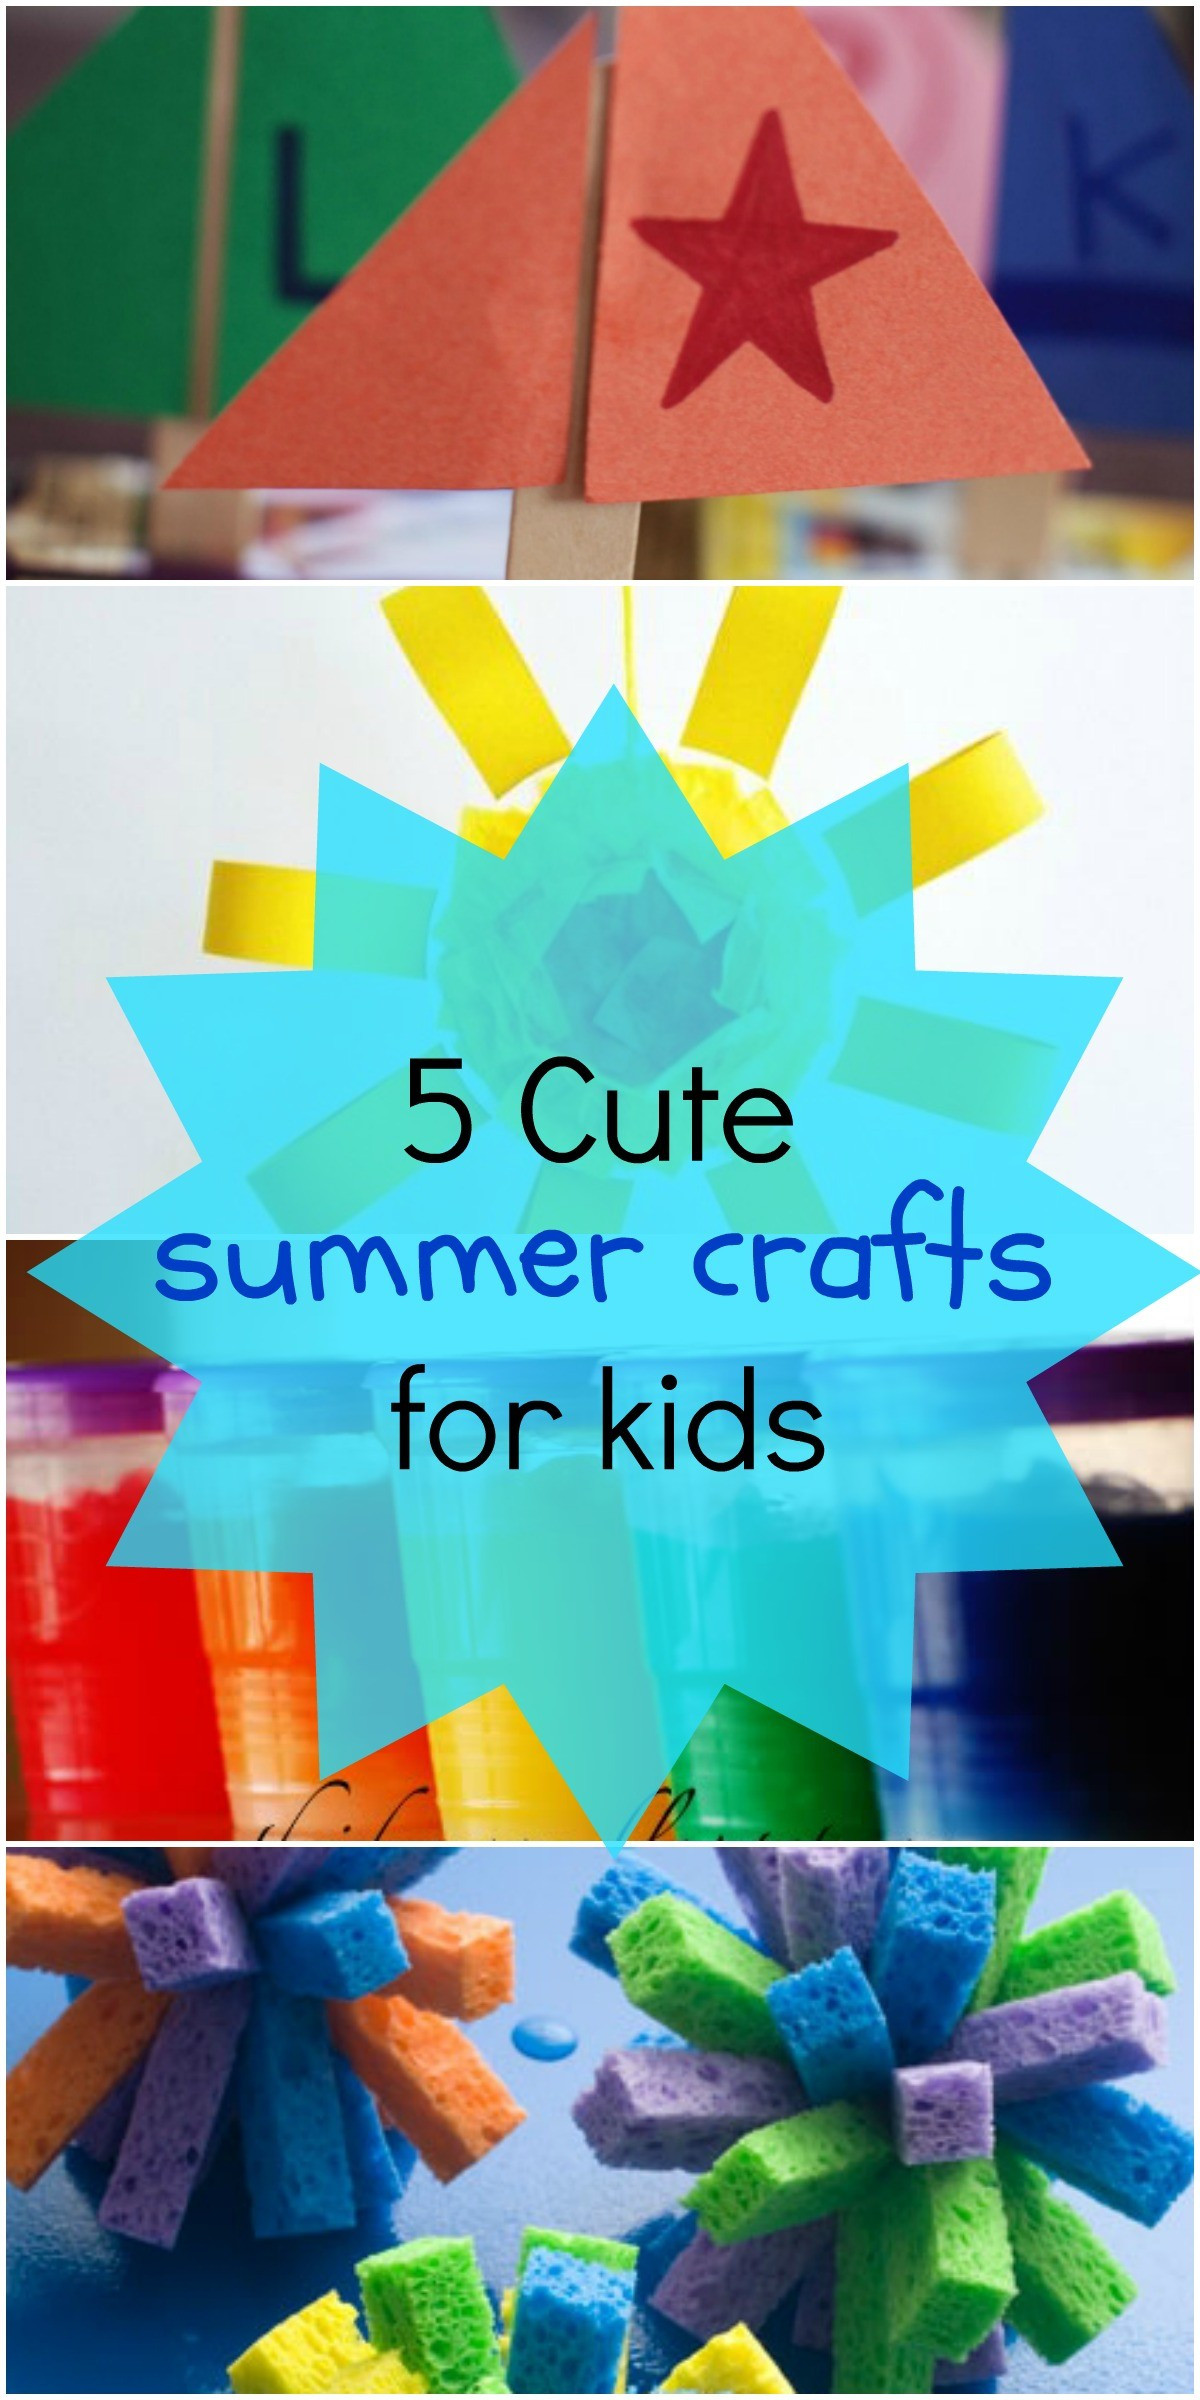 Summer Crafts Ideas For Kids
 5 Fun Summer Crafts for Kids Love These Art Project Ideas